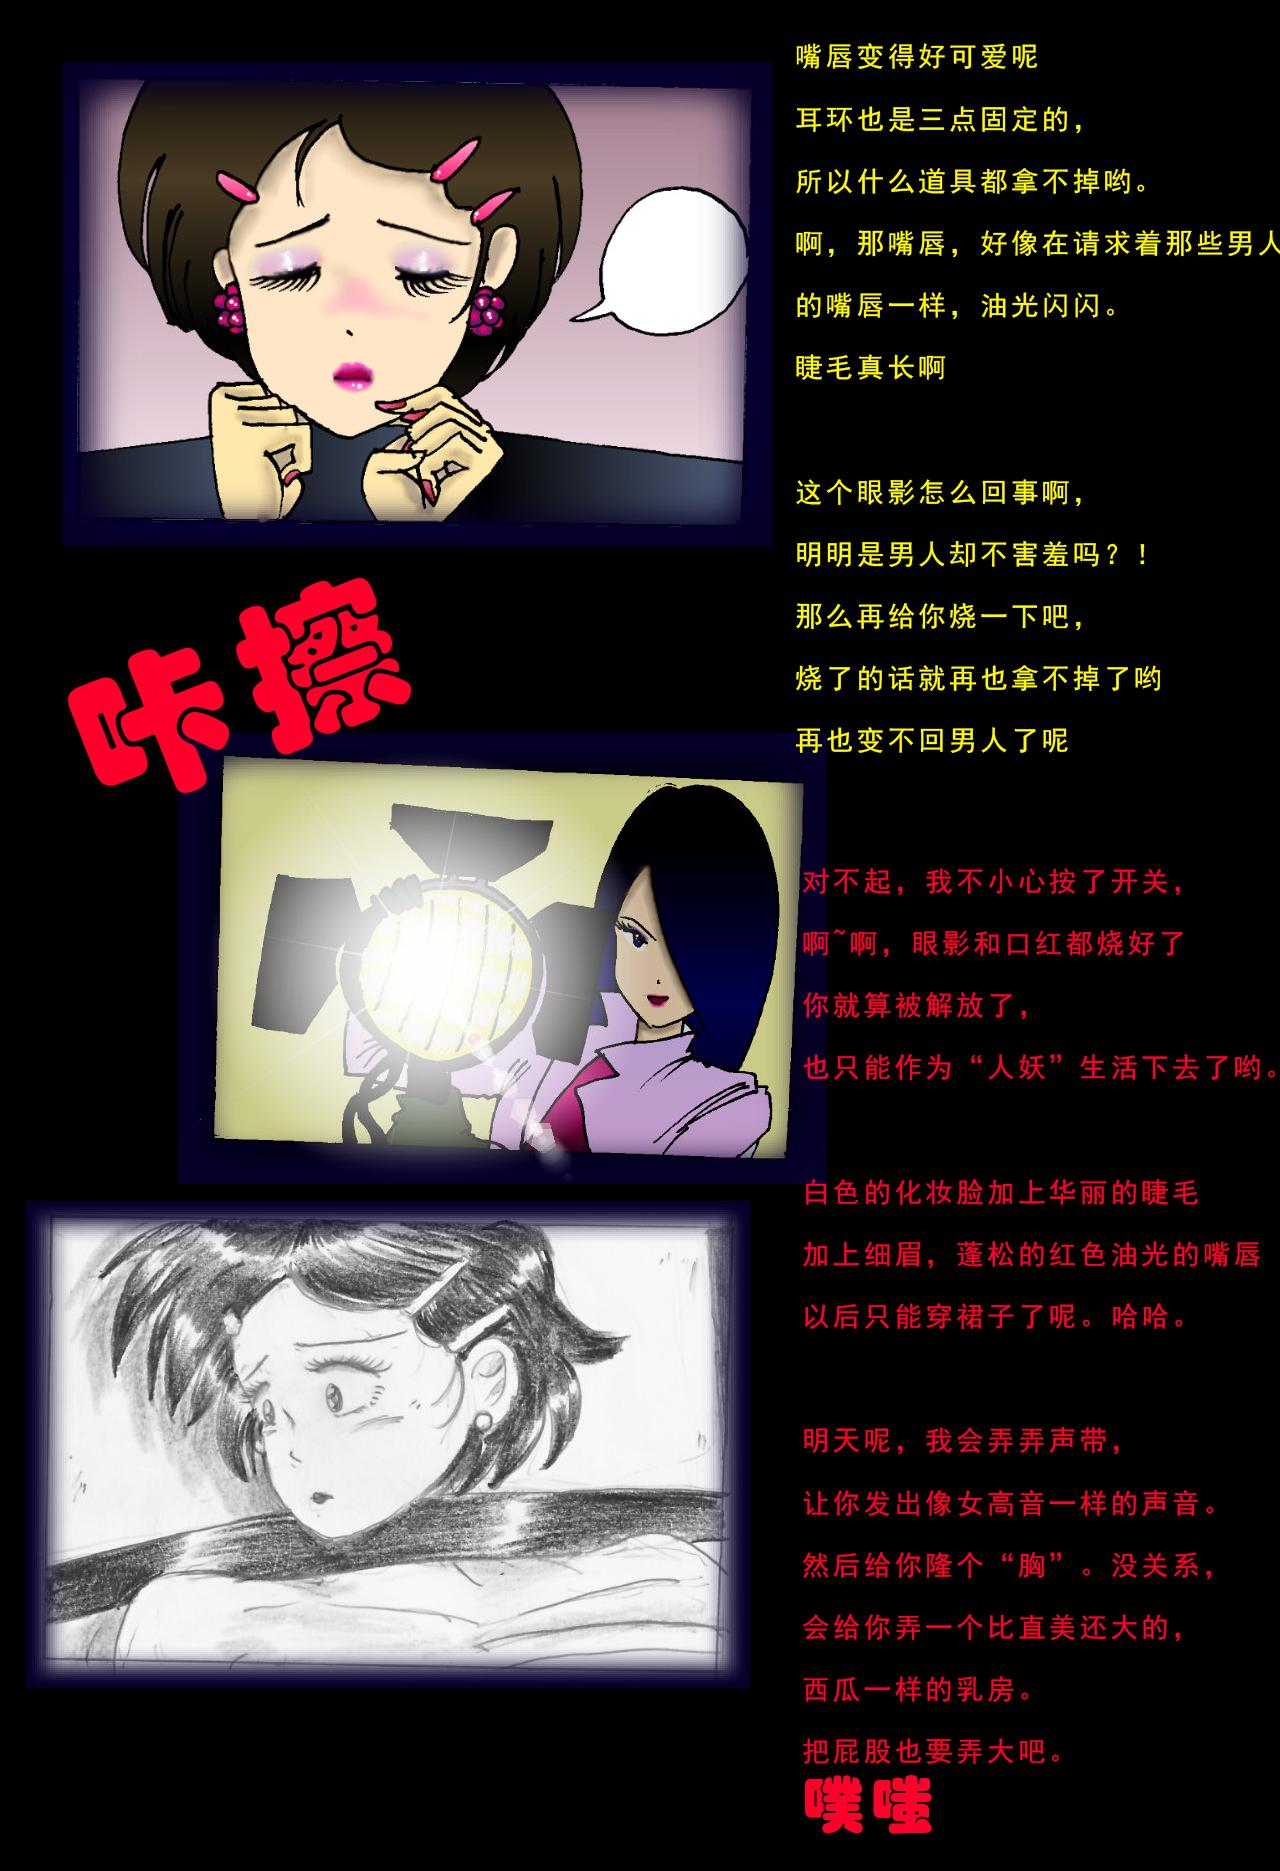 Love Special Police Third Platoon Captain Abduction Restraint Edition【chinese】 Grandpa - Page 8